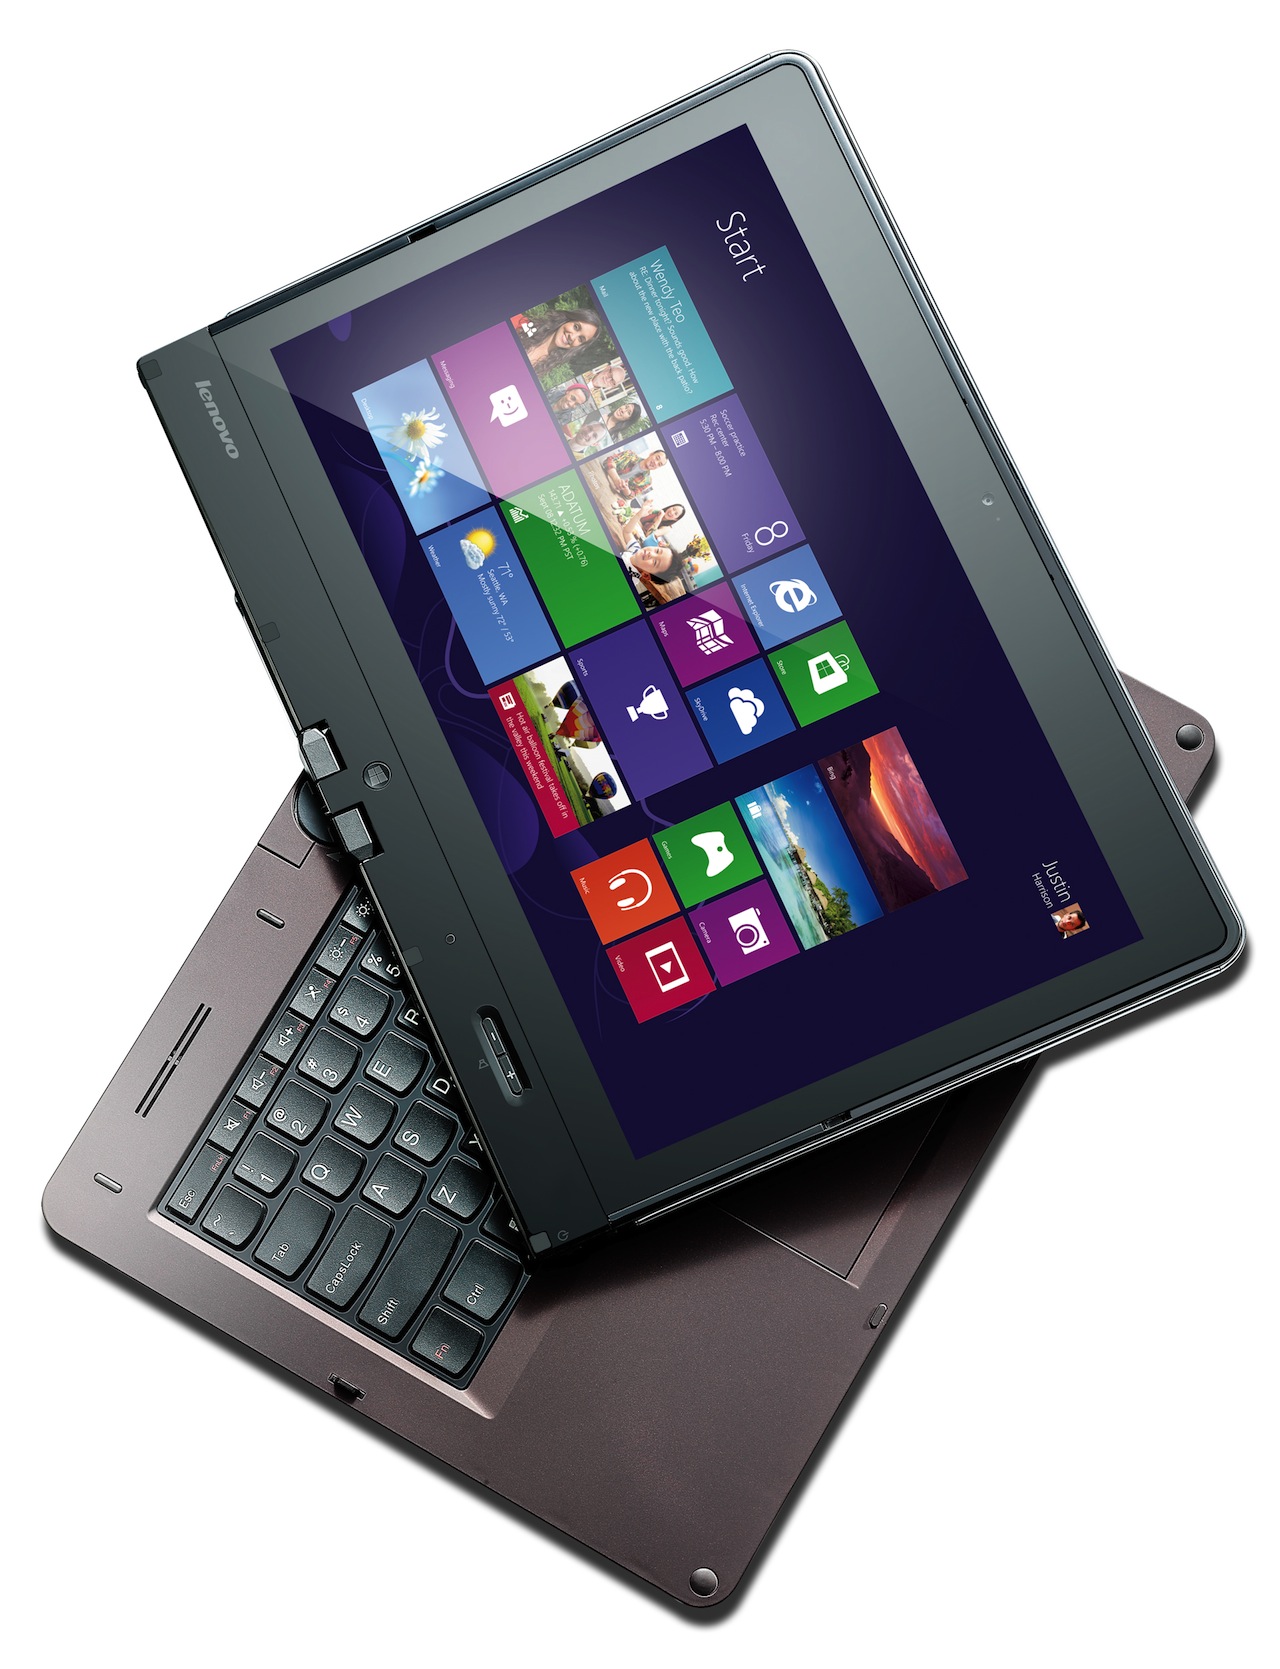 Lenovo unveils slew of tablets with keyboards, laptops with